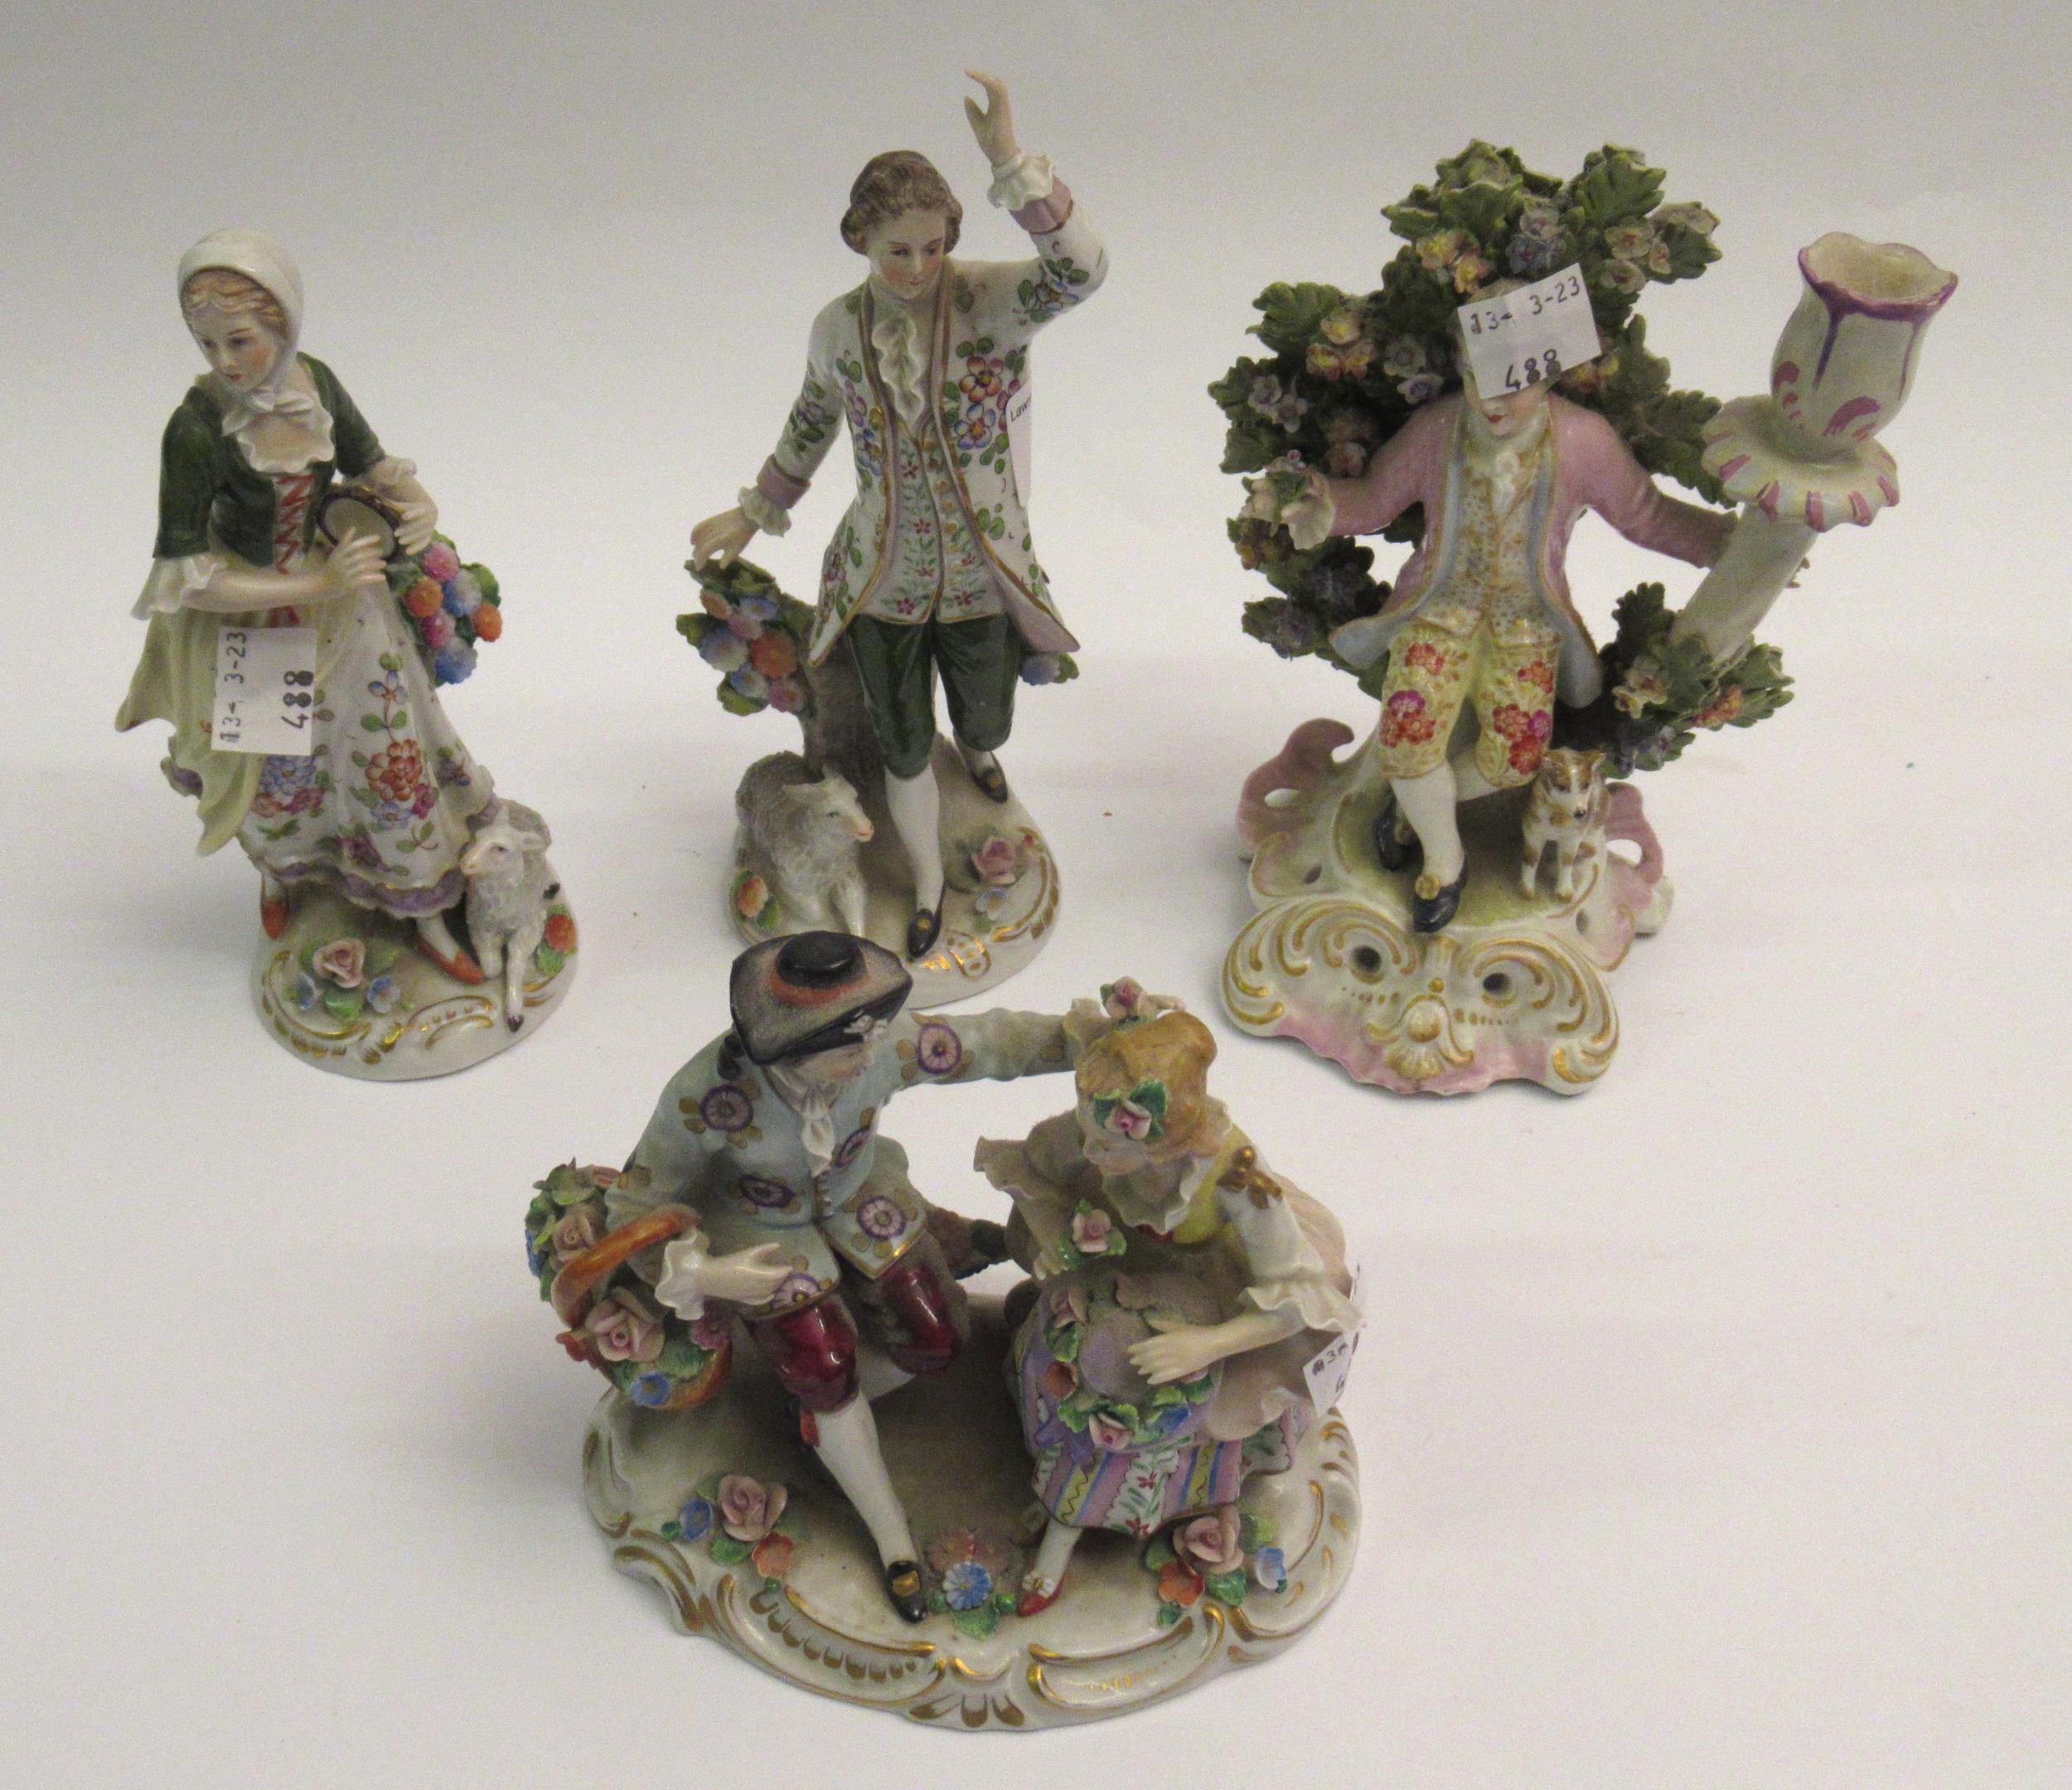 Pair of Sitzendorf figures, the tallest 18cm, together with a Sitzendorf group of a boy and girl and